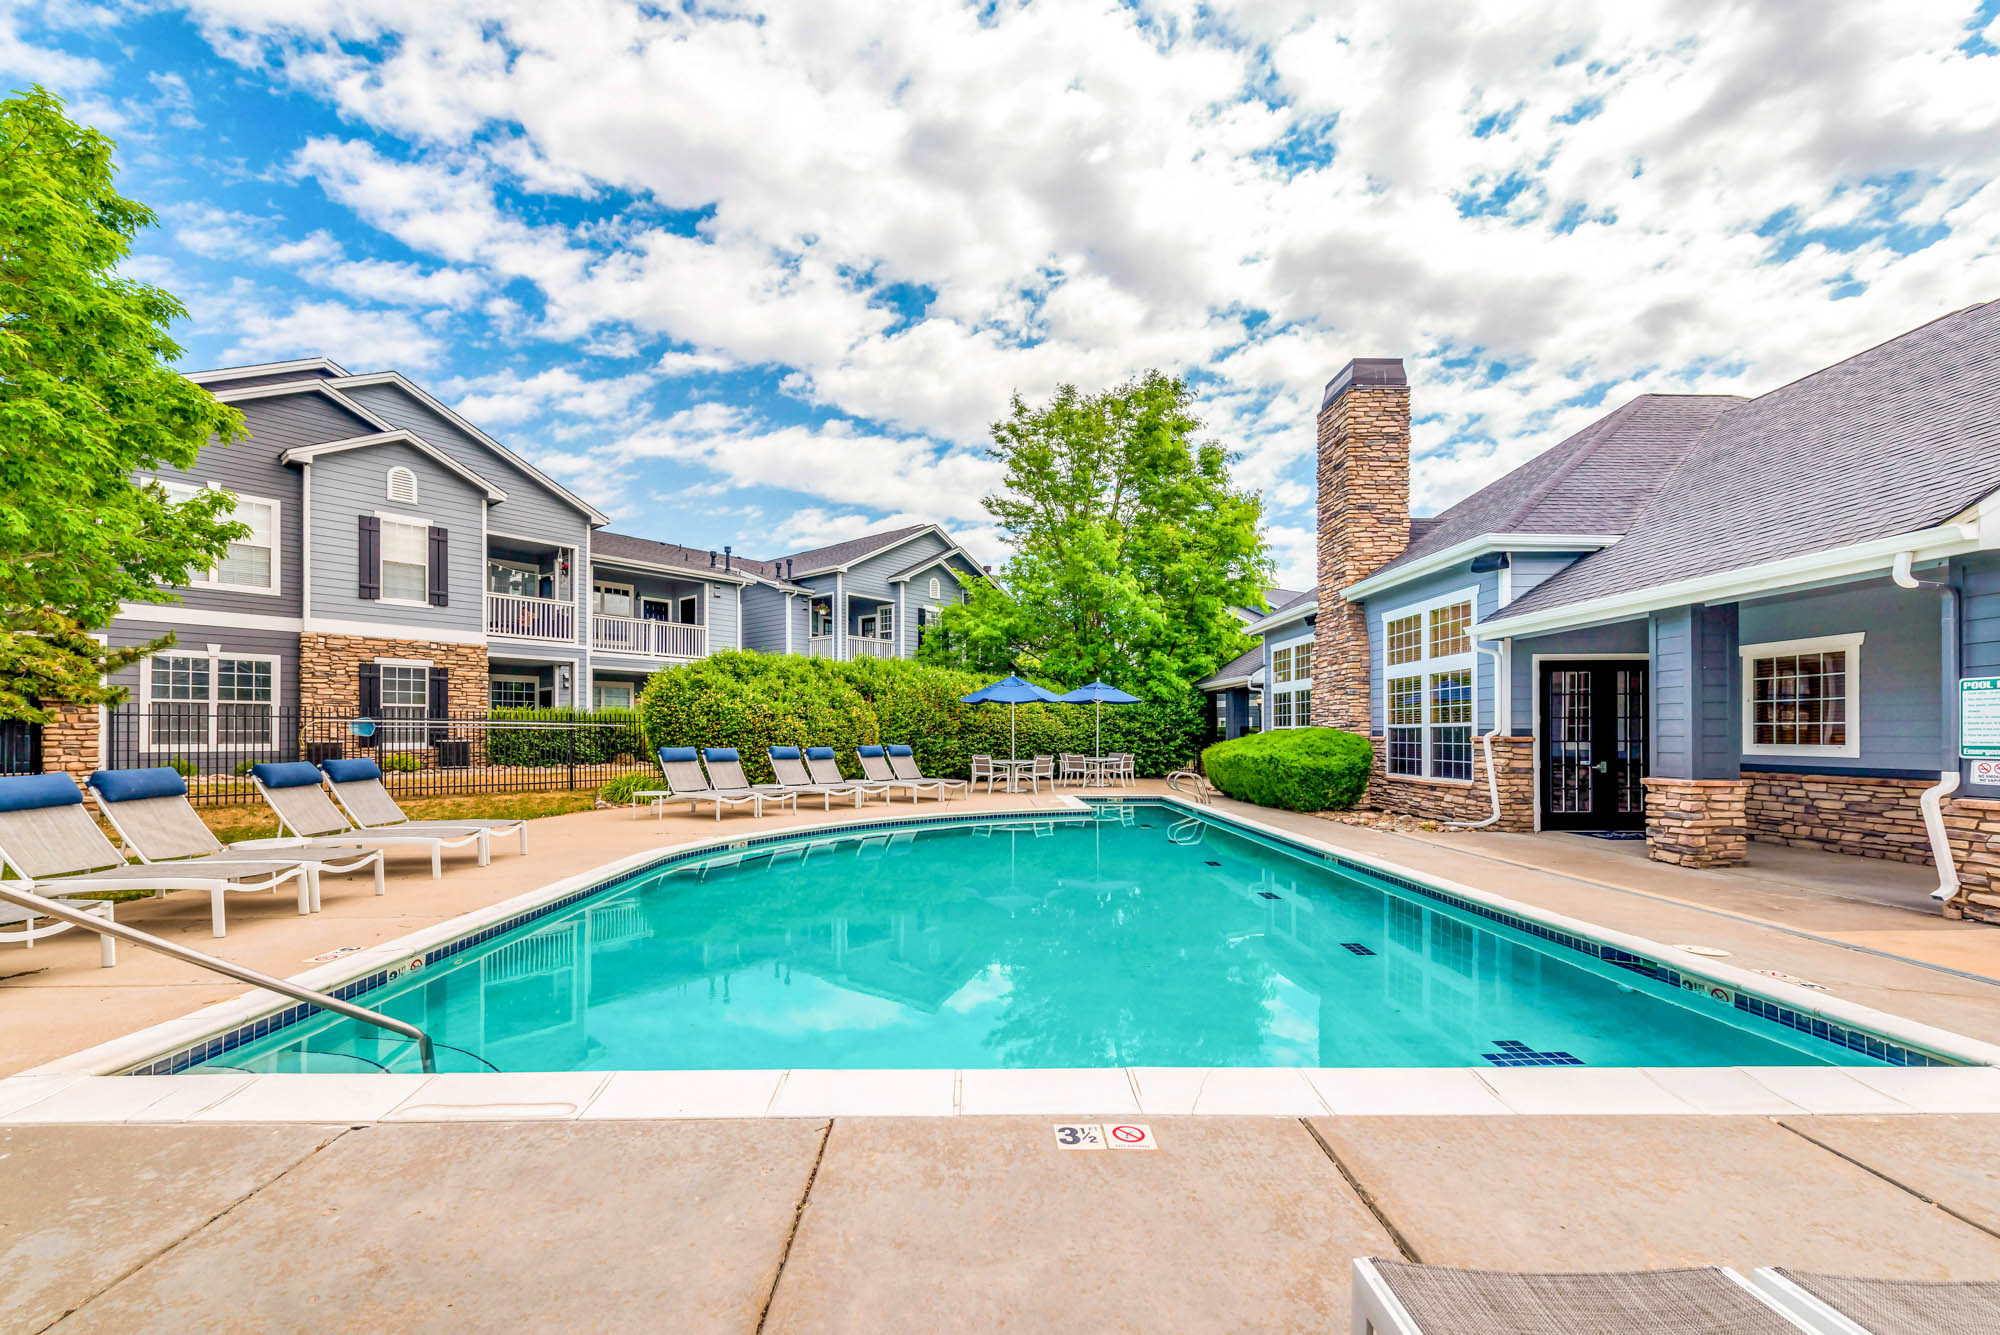 The pool at Eagle Ridge apartments in Denver, CO.